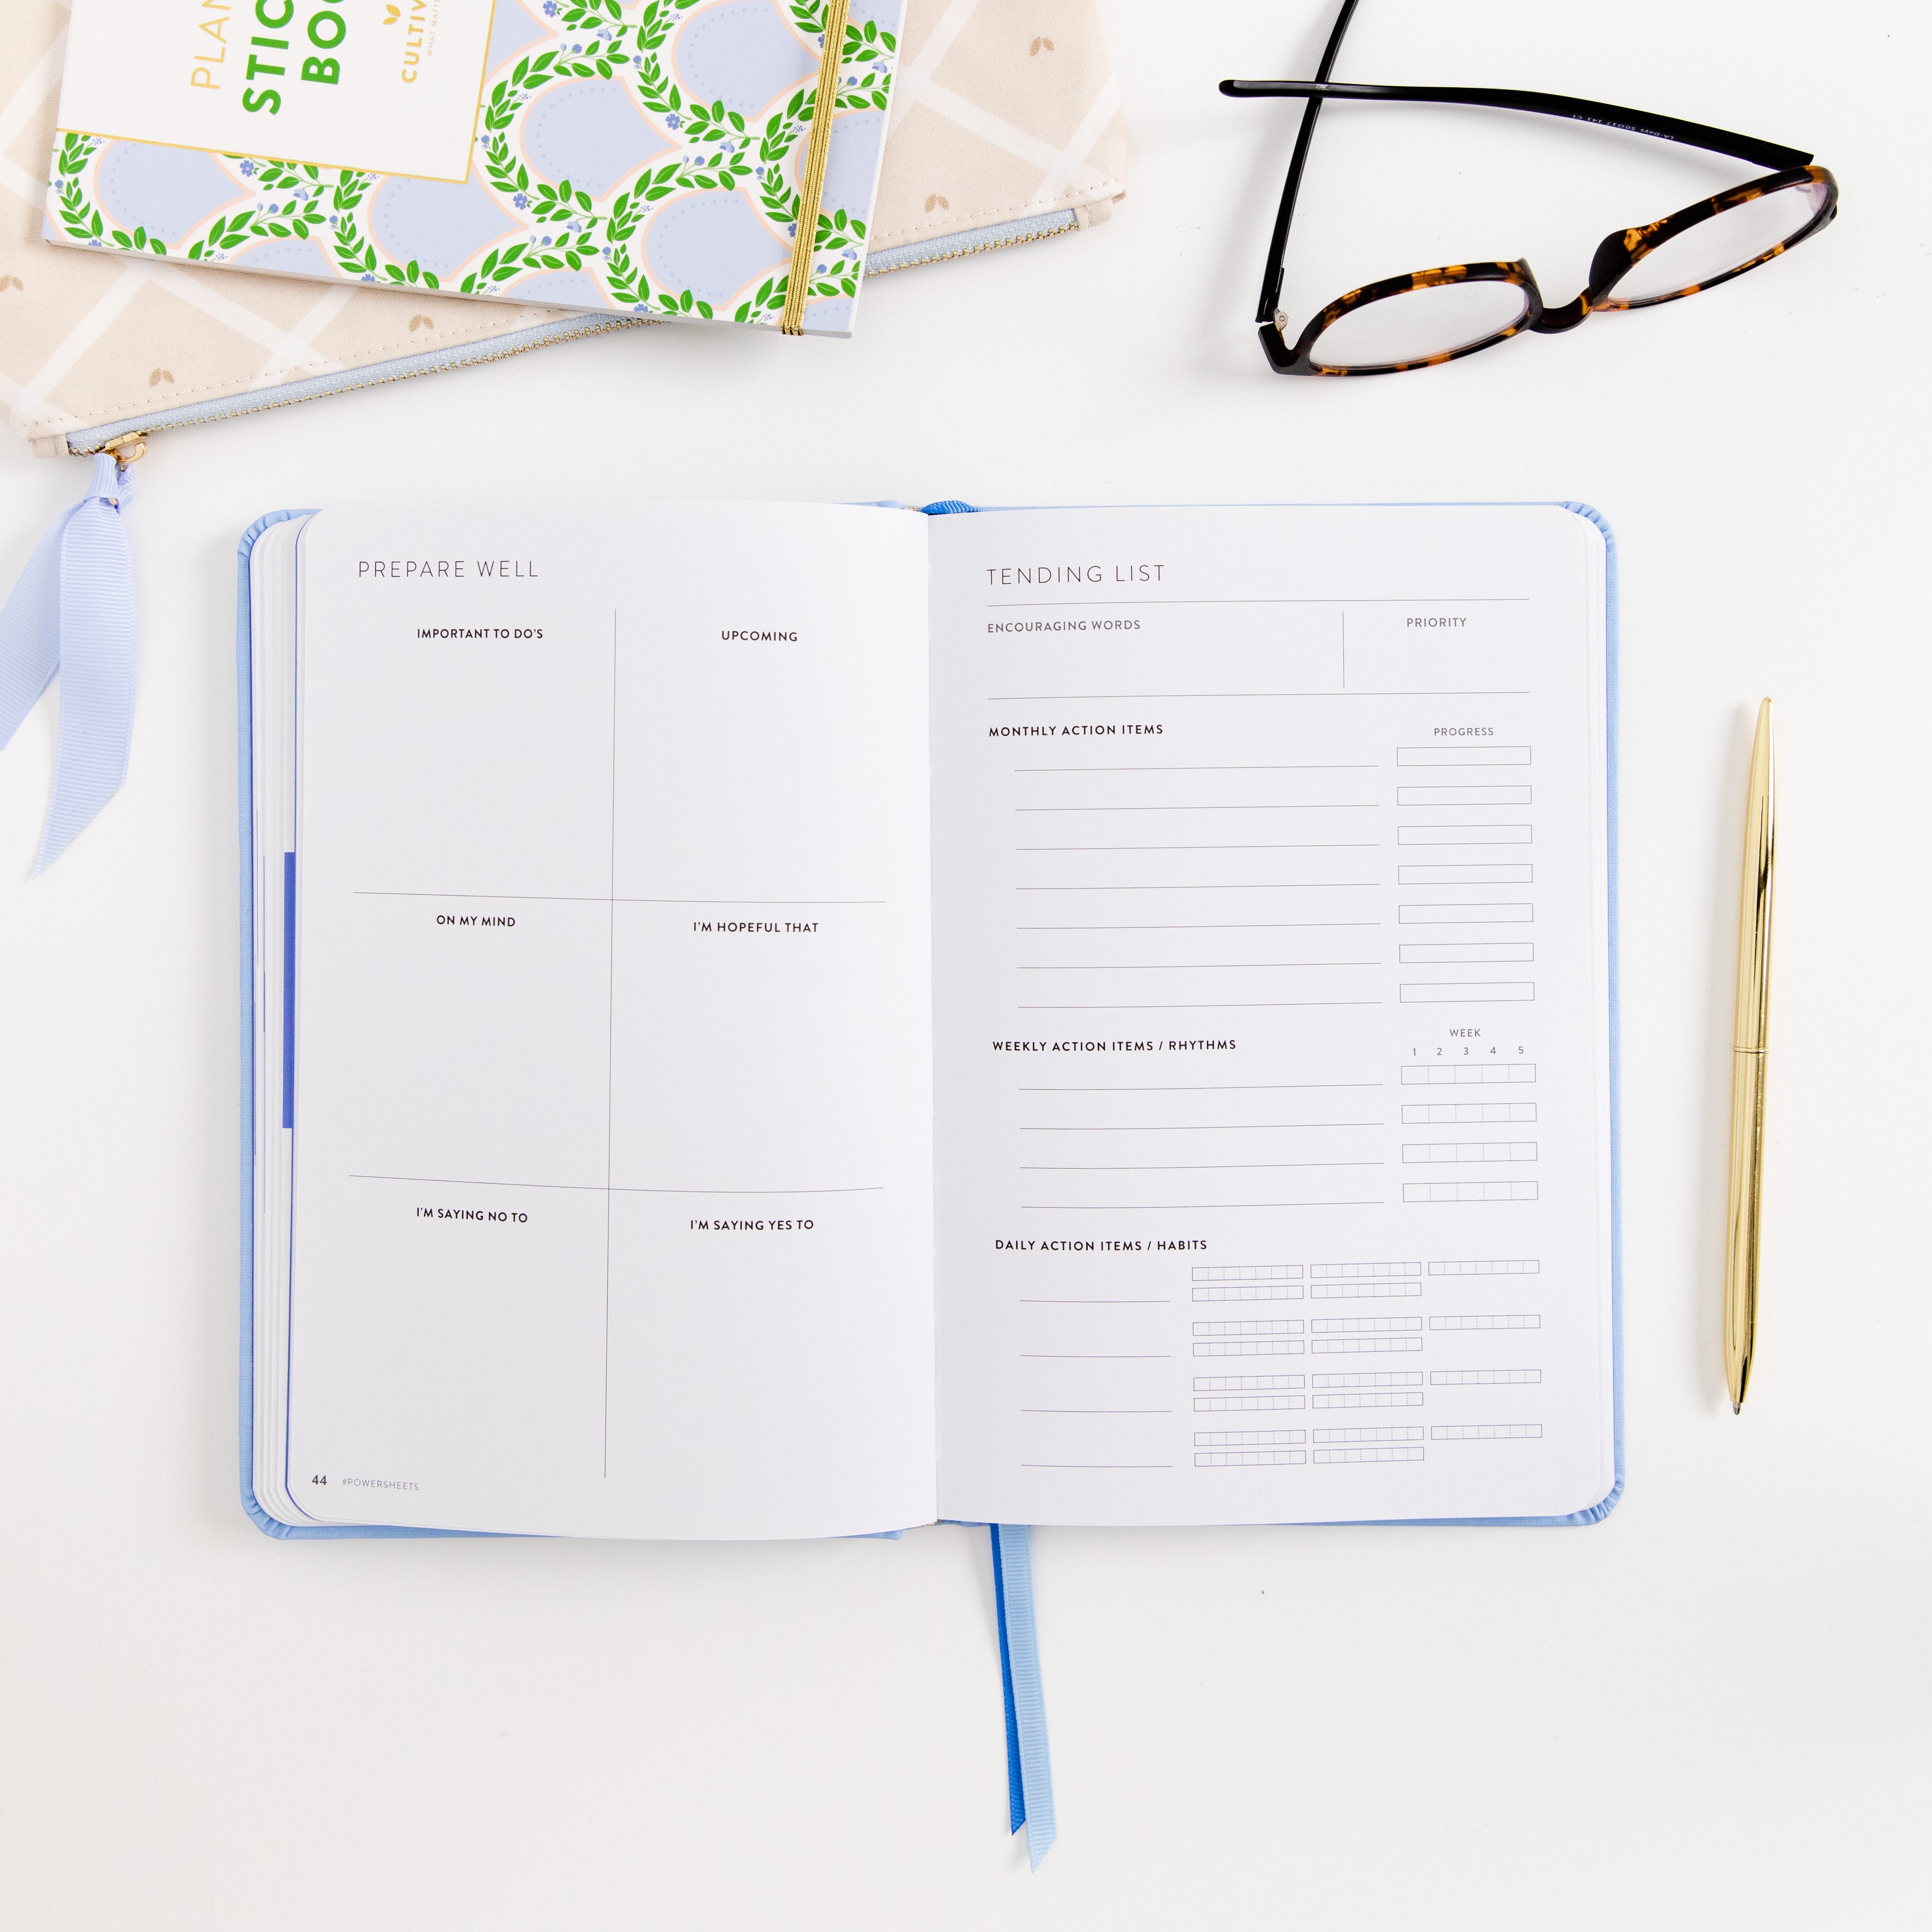  90-Day PowerSheets® Goal Planner by Cultivate Cultivate Perfumarie